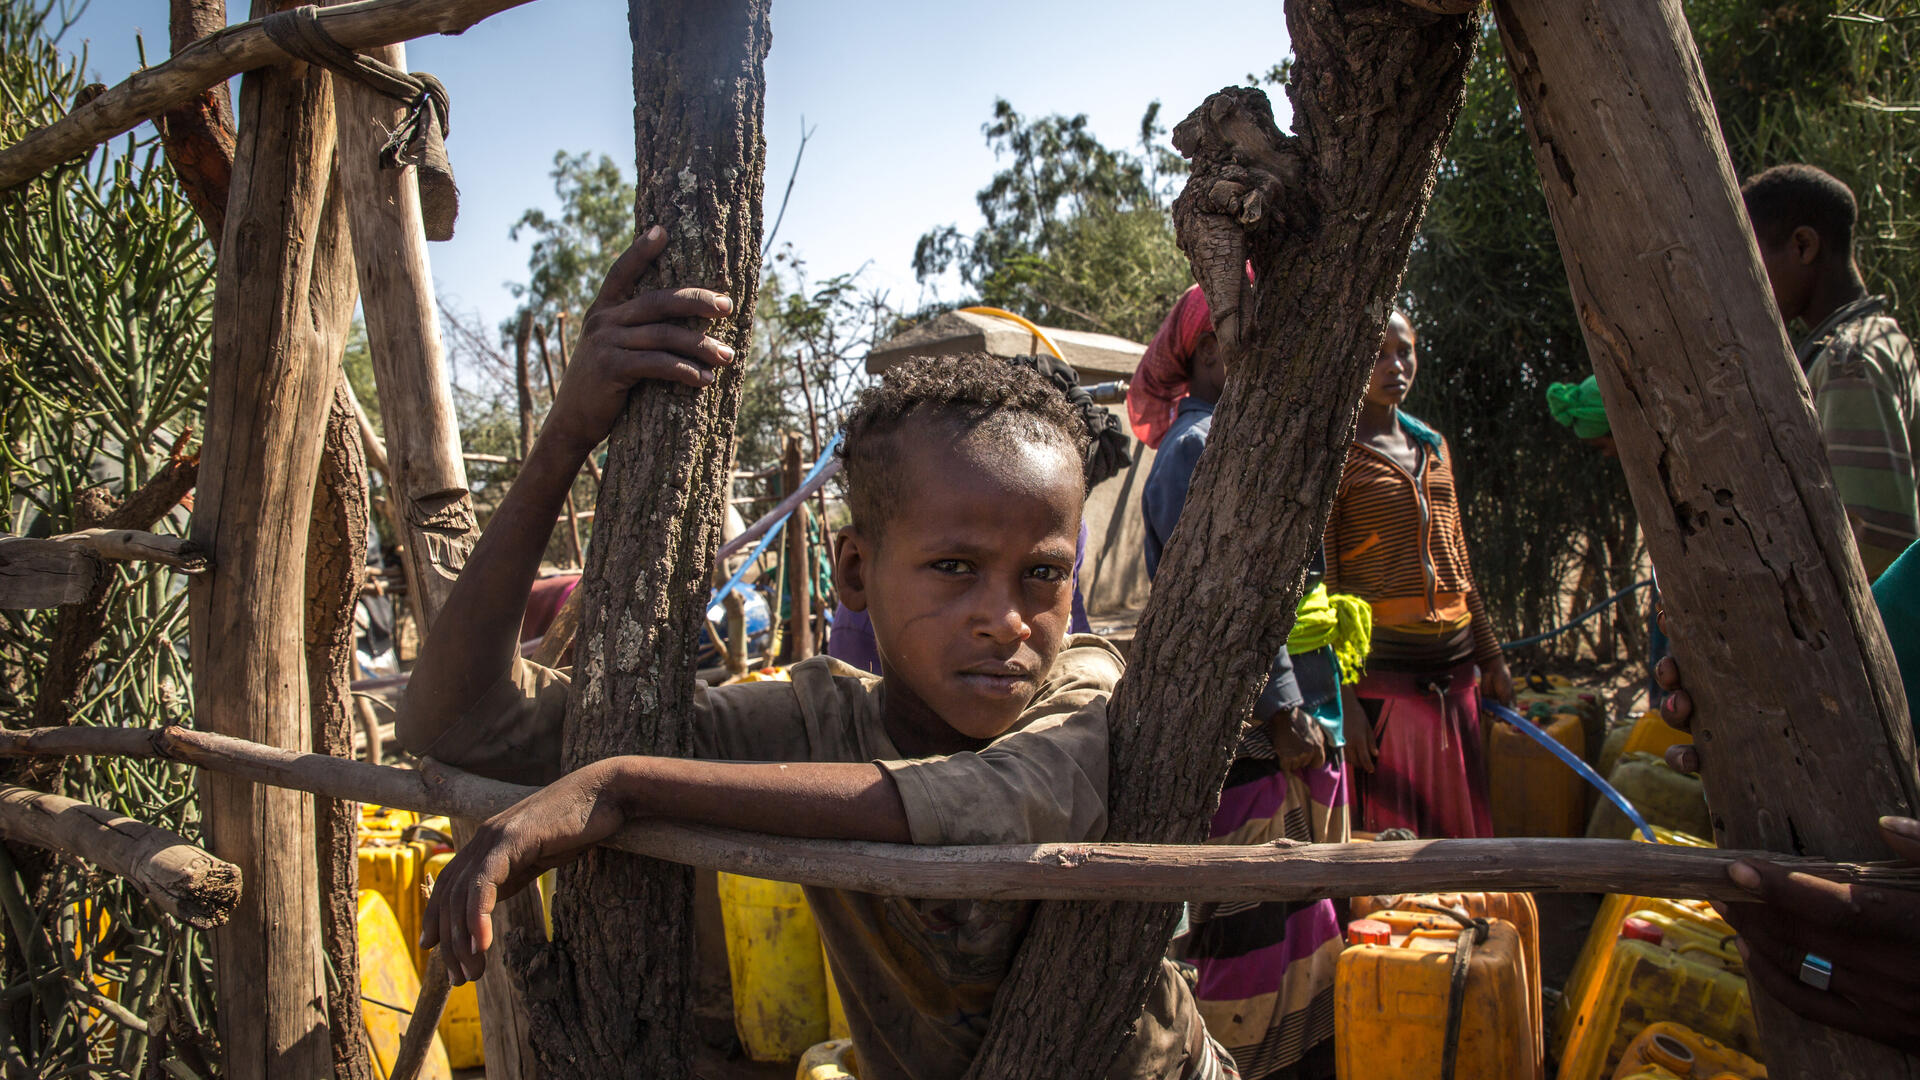 A boy leans against a fence made of branches in Ethiopia